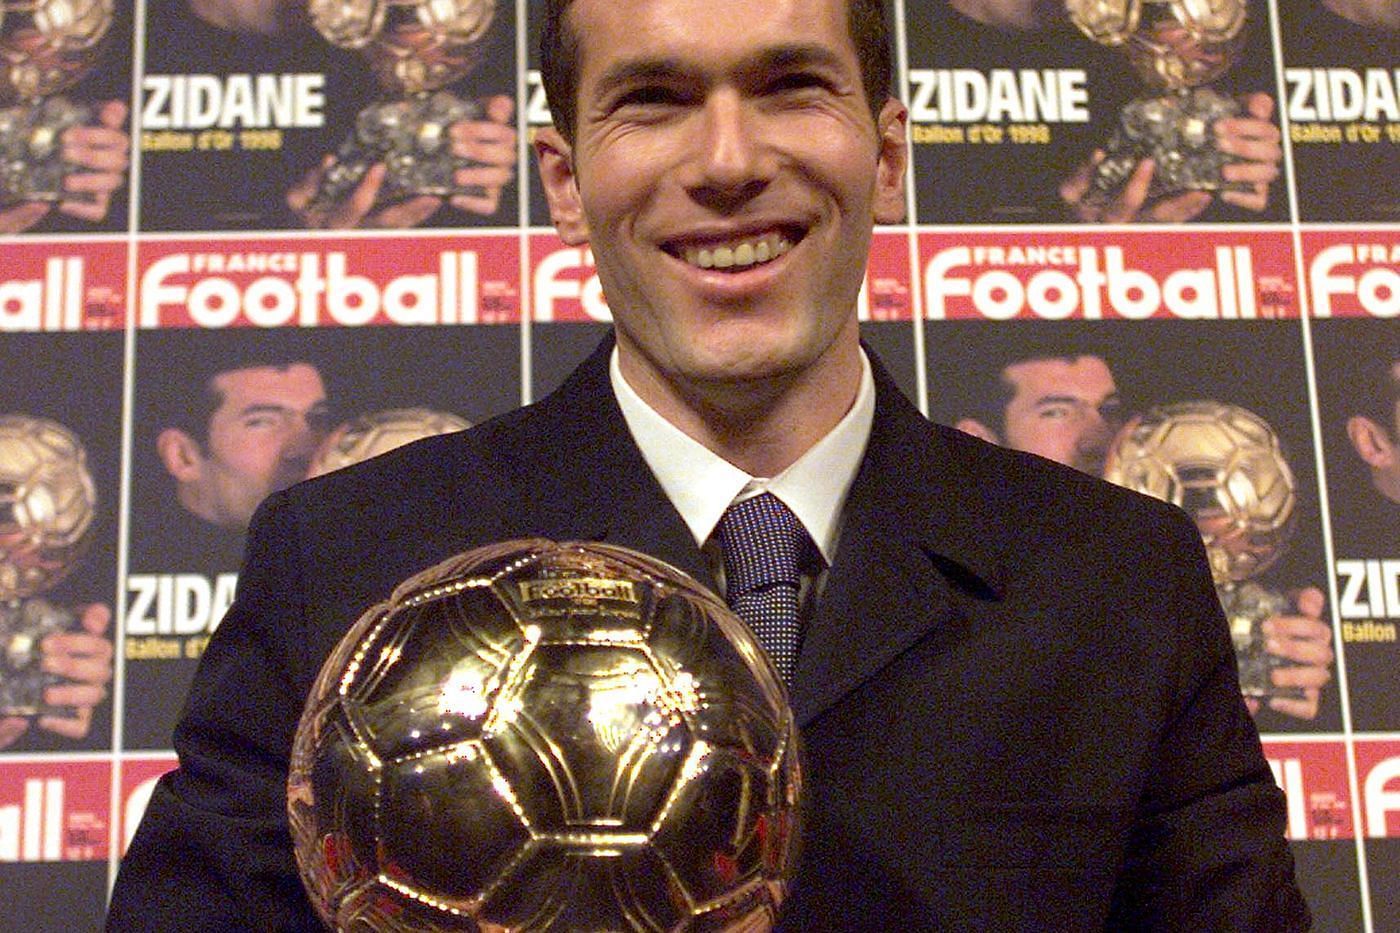 Zinedine Zidane is one of the most successful players and managers of his generation.